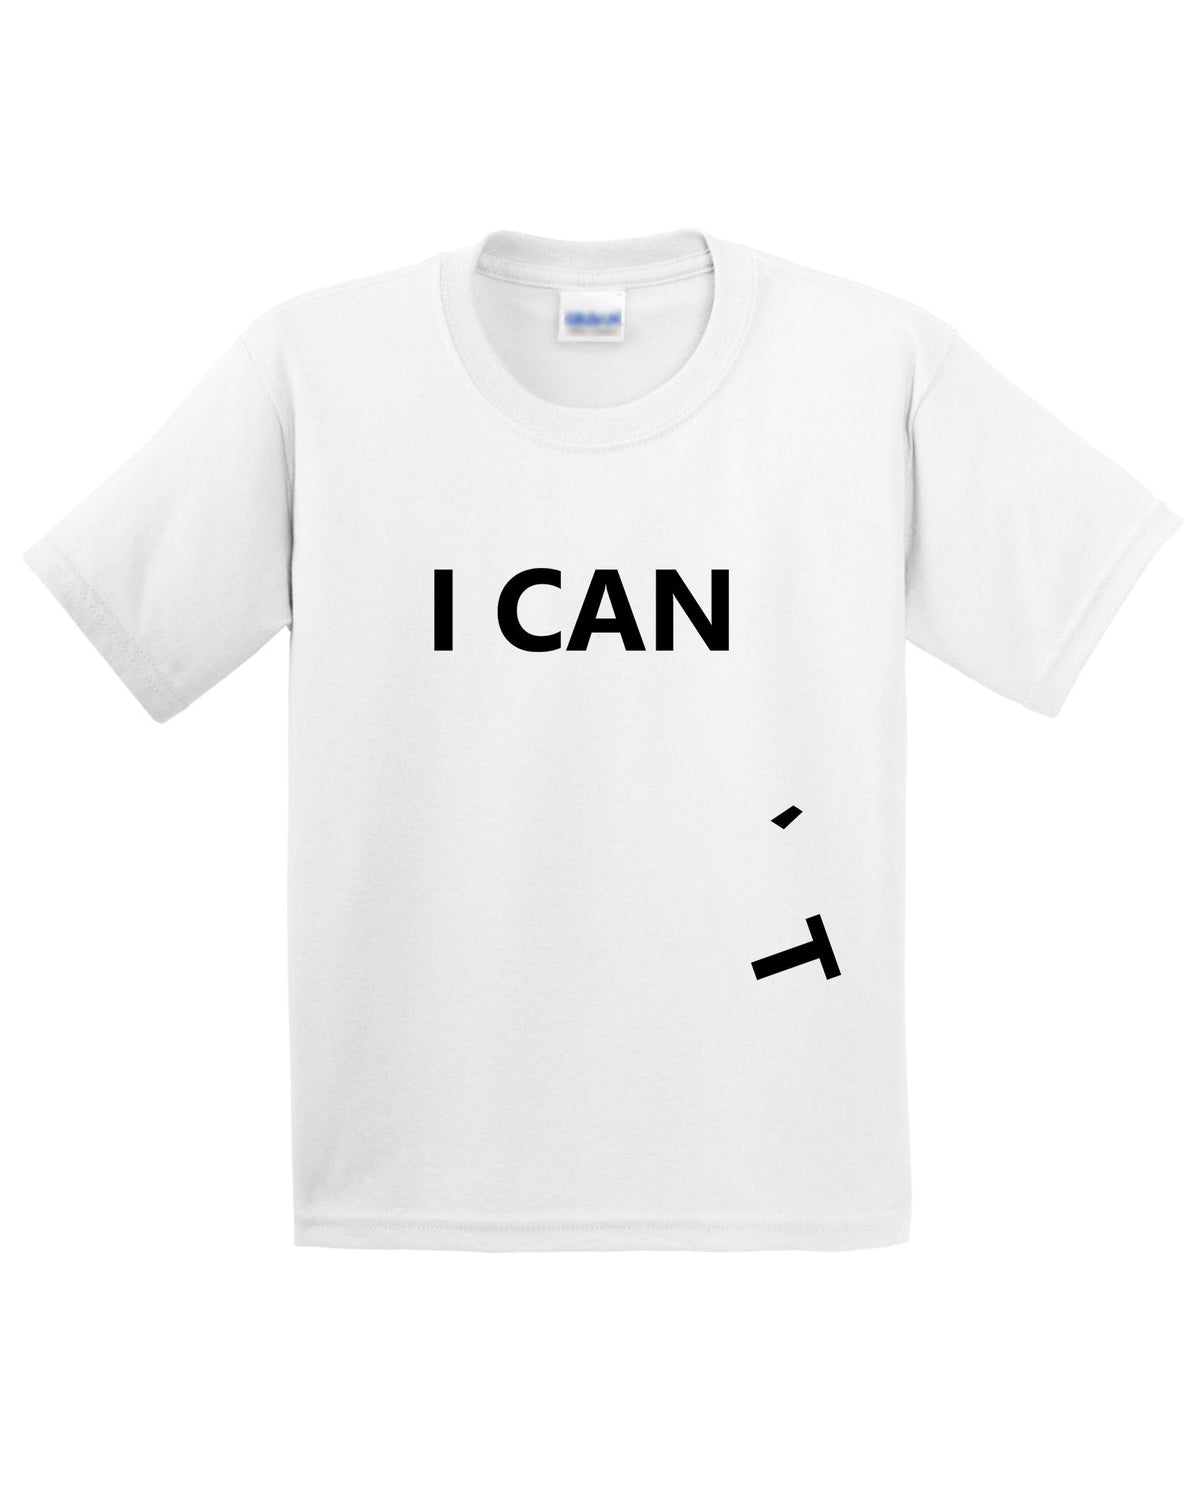 I Can't Funny  Kids T-Shirt